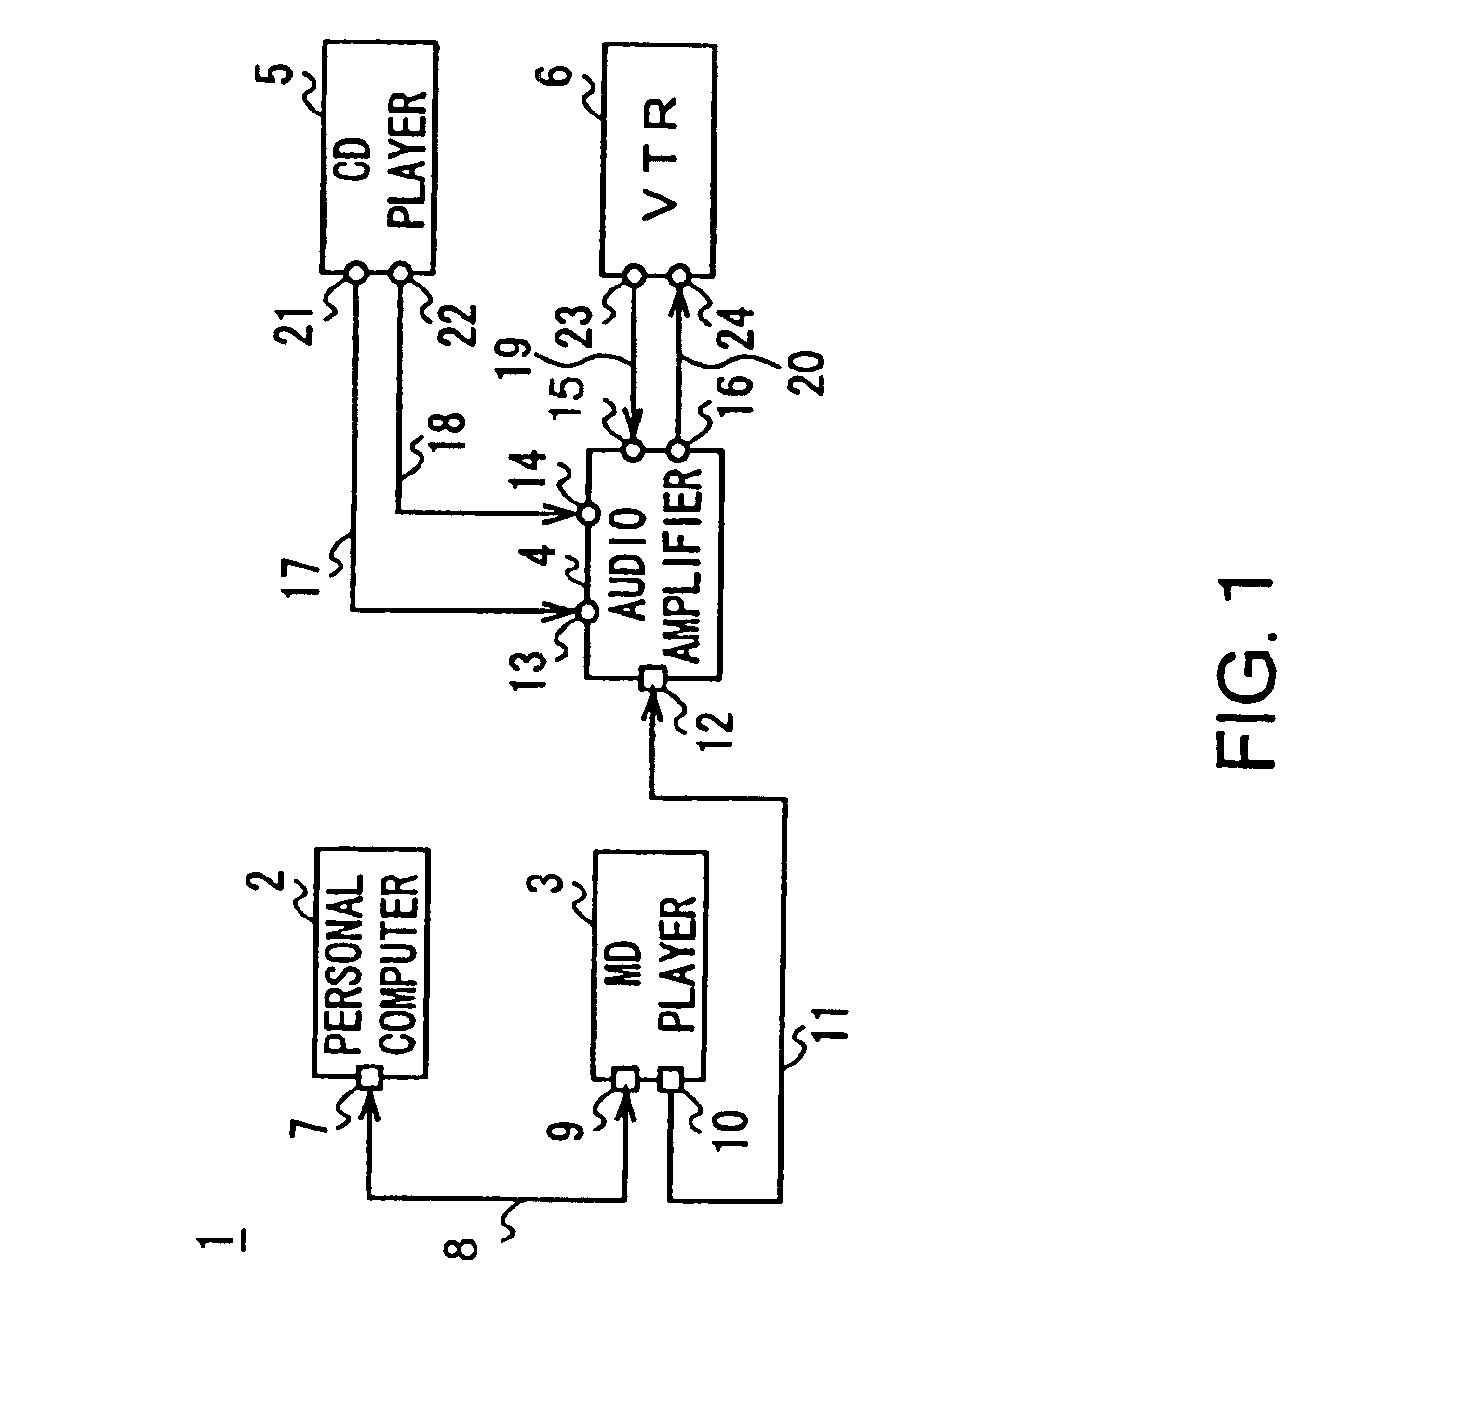 Audio visual system having a serial bus for identifying devices connected to the external terminals of an amplifier in the system